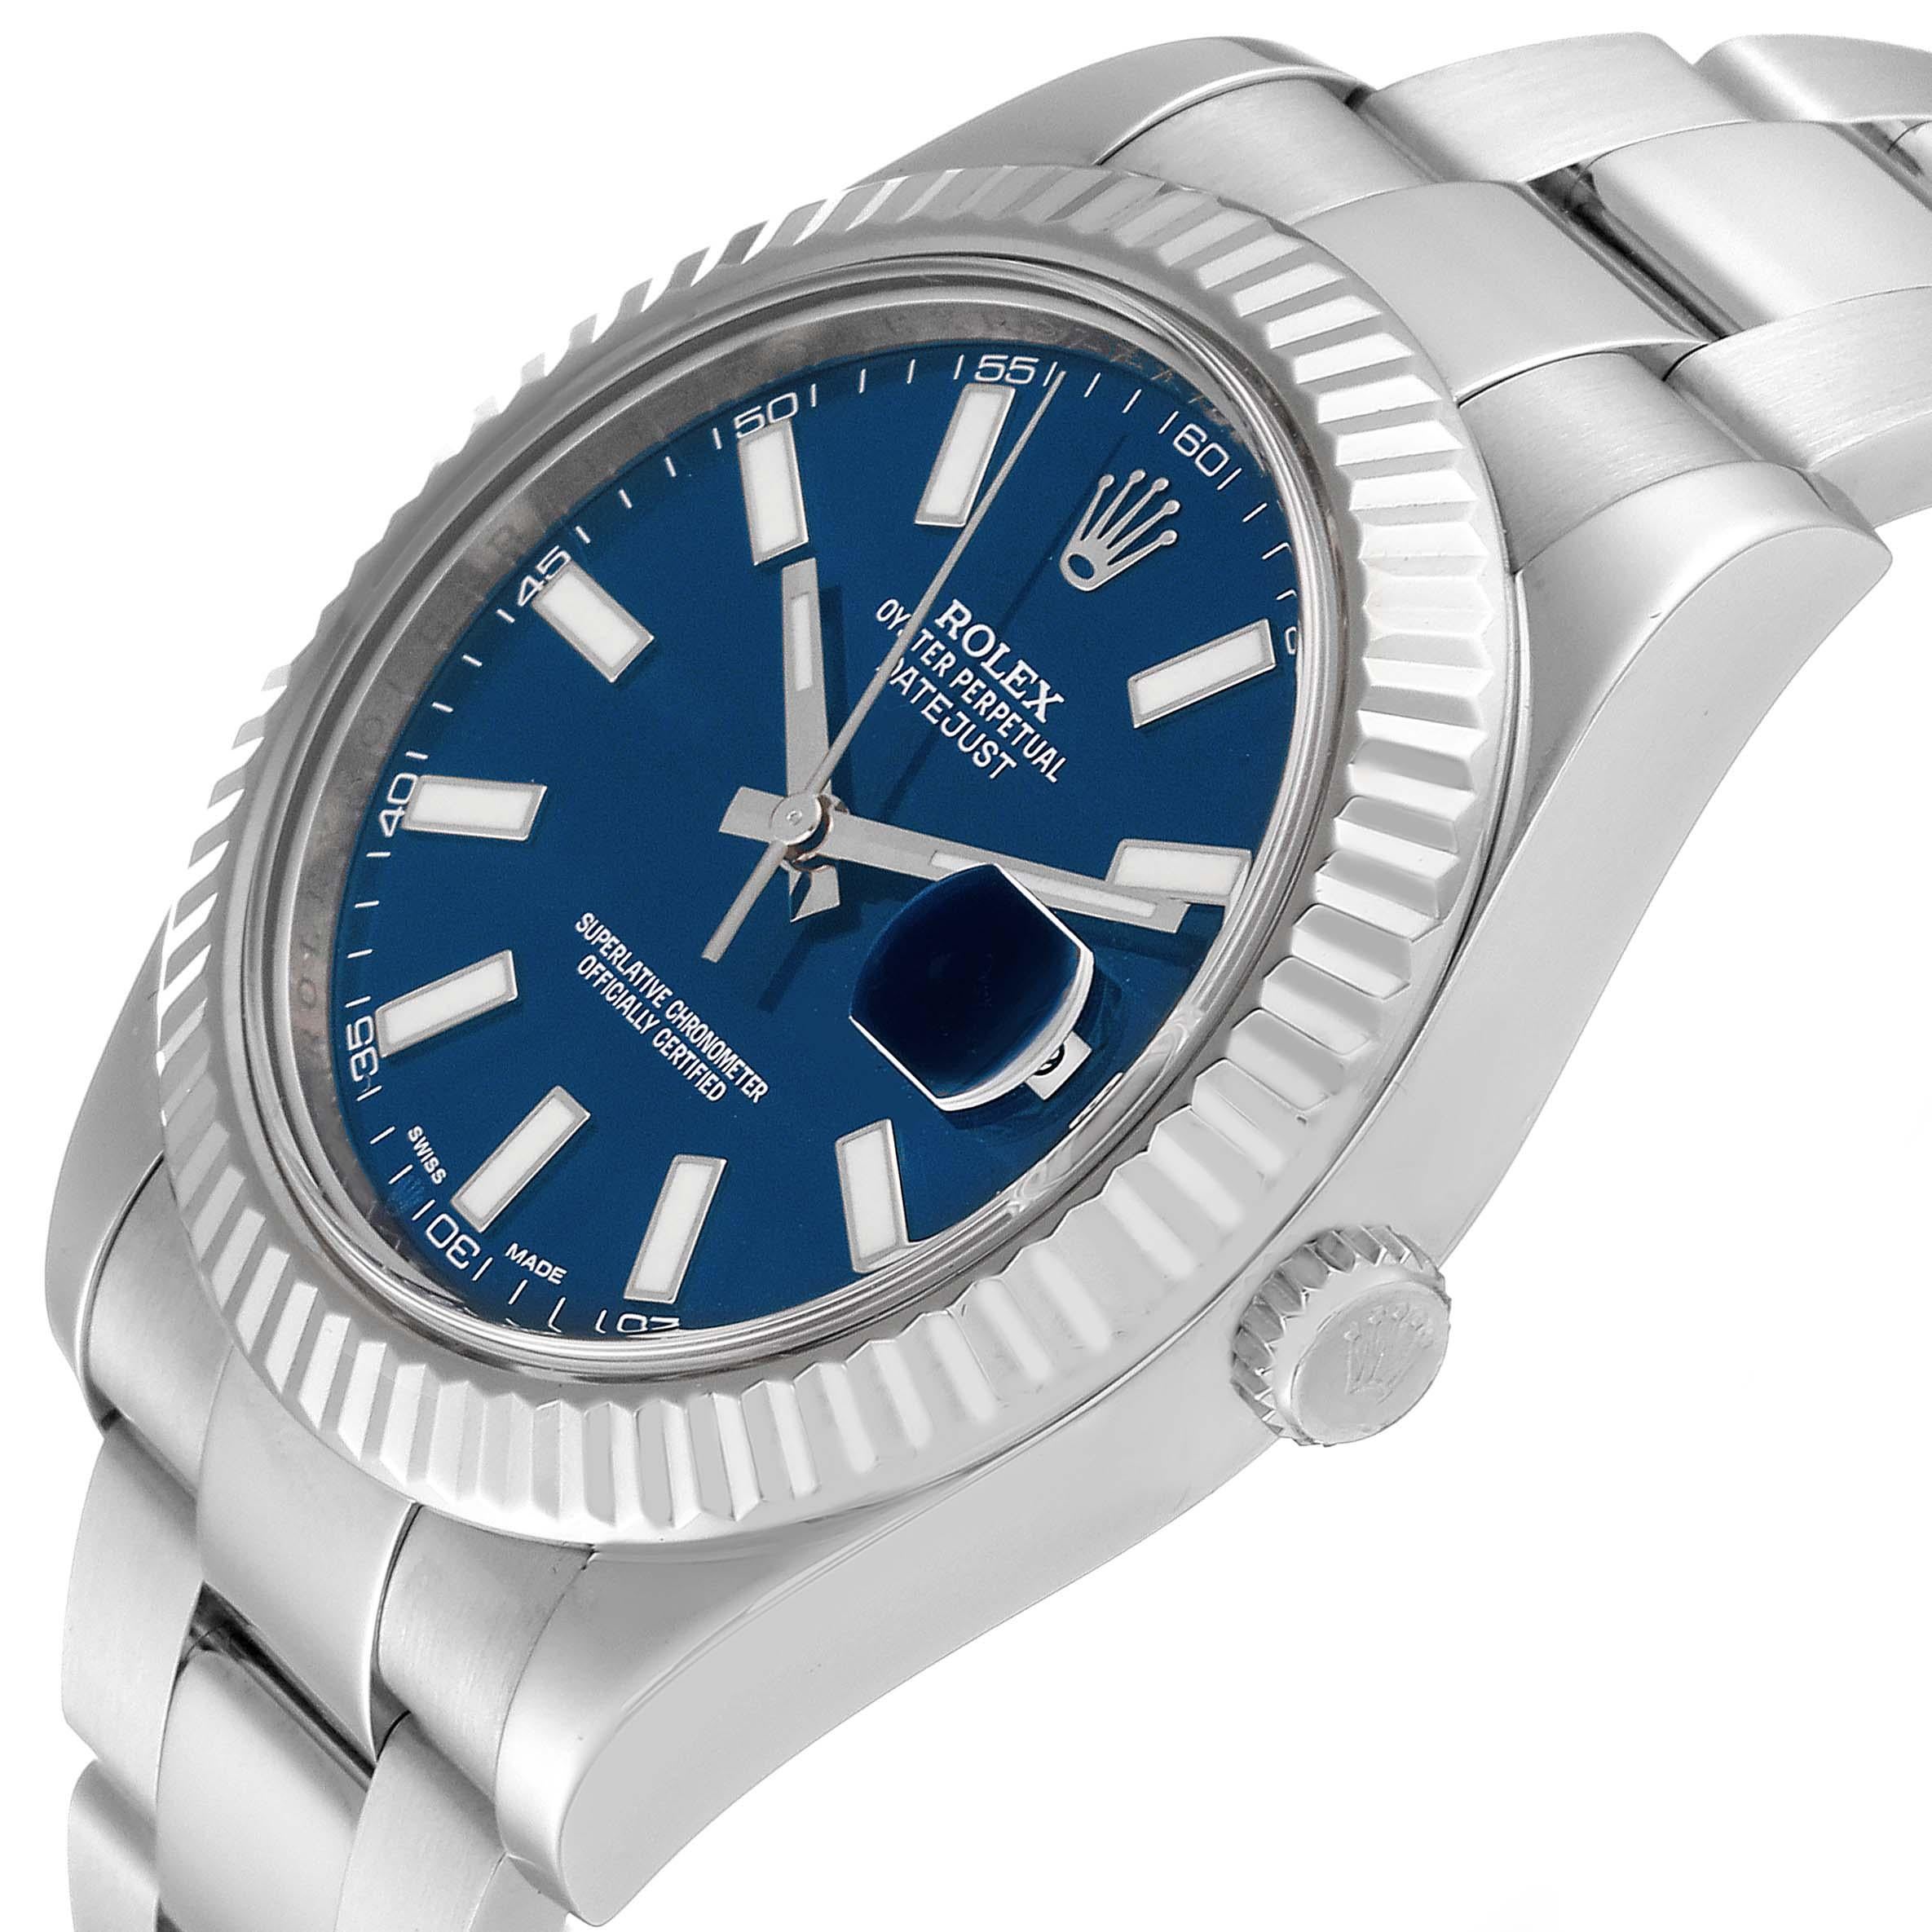 Rolex Datejust II 41 Blue Dial Steel White Gold Mens Watch 116334. Officially certified chronometer automatic self-winding movement. Stainless steel case 41 mm in diameter. Rolex logo on a crown. 18k white gold fluted bezel. Scratch resistant